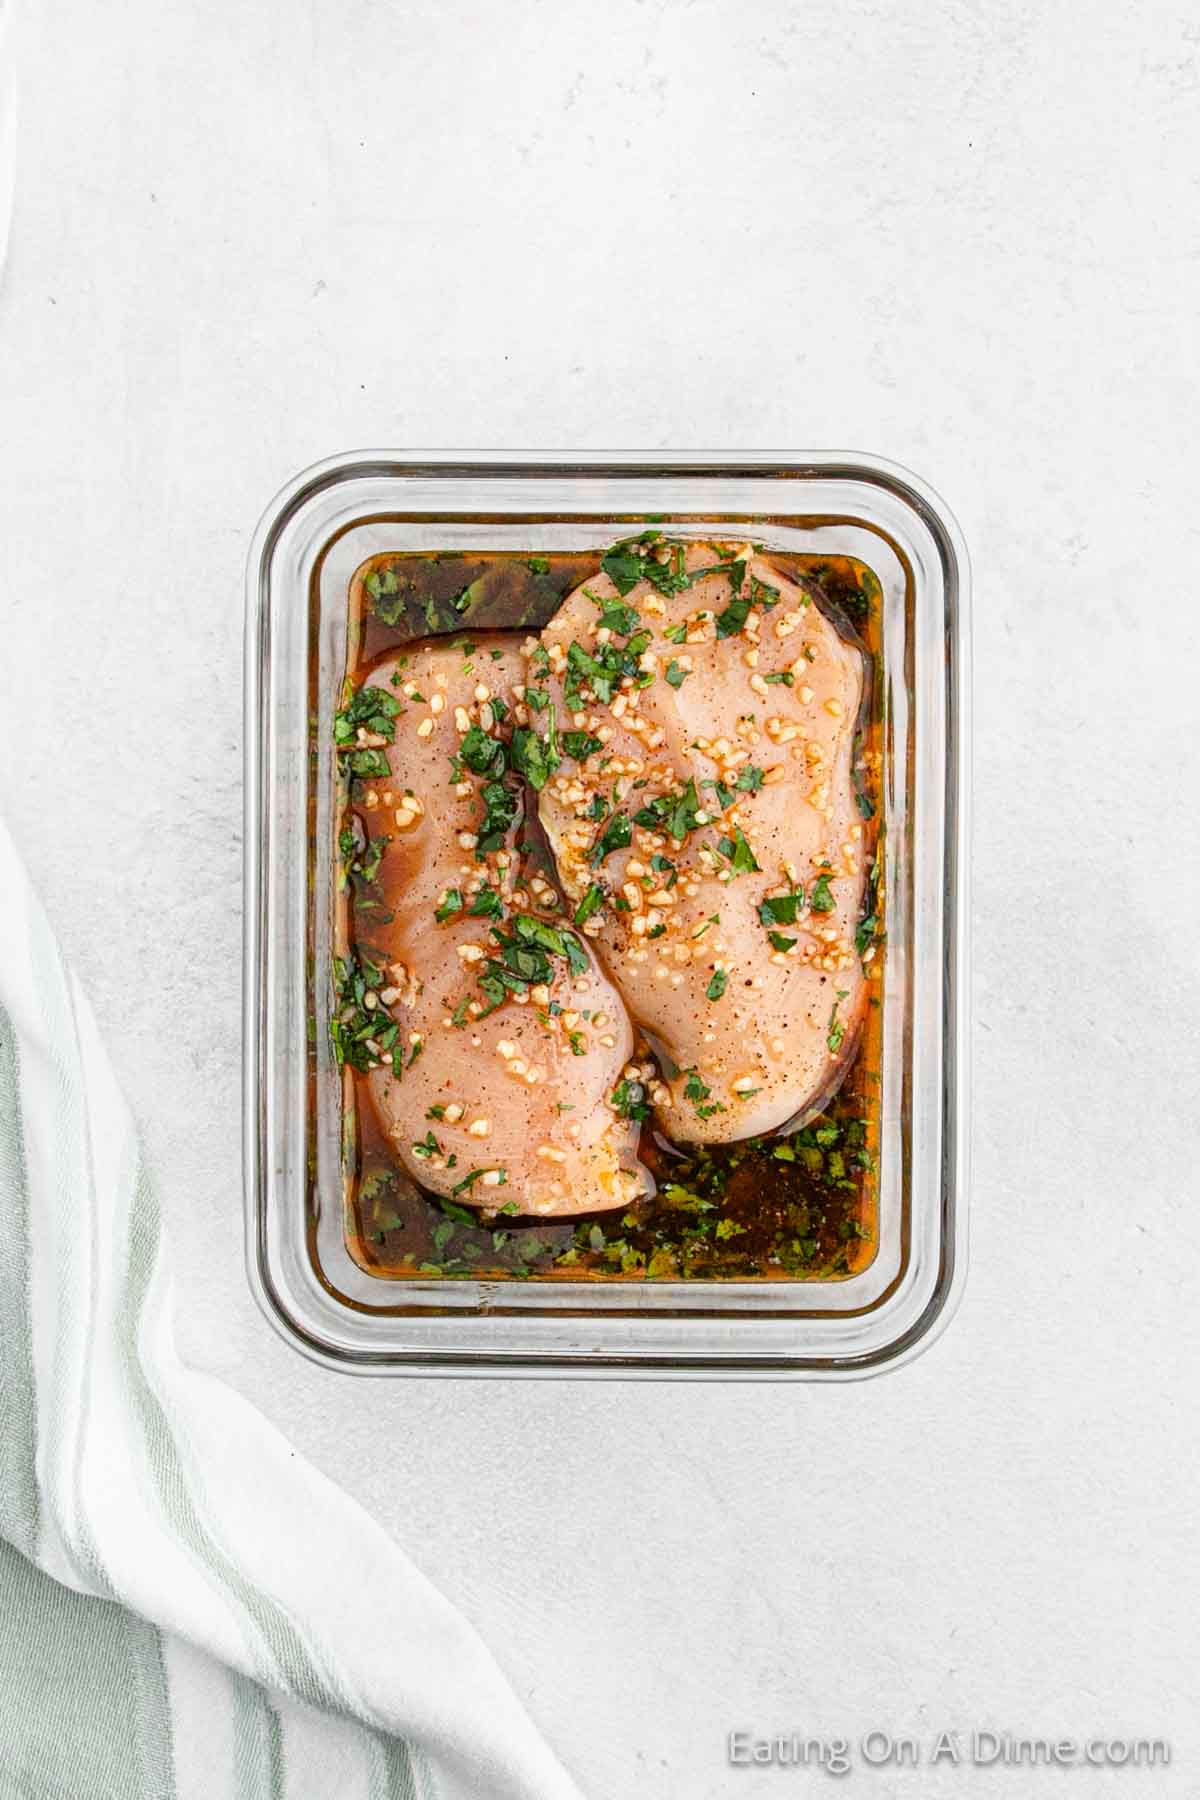 Marinating chicken in a glass dish